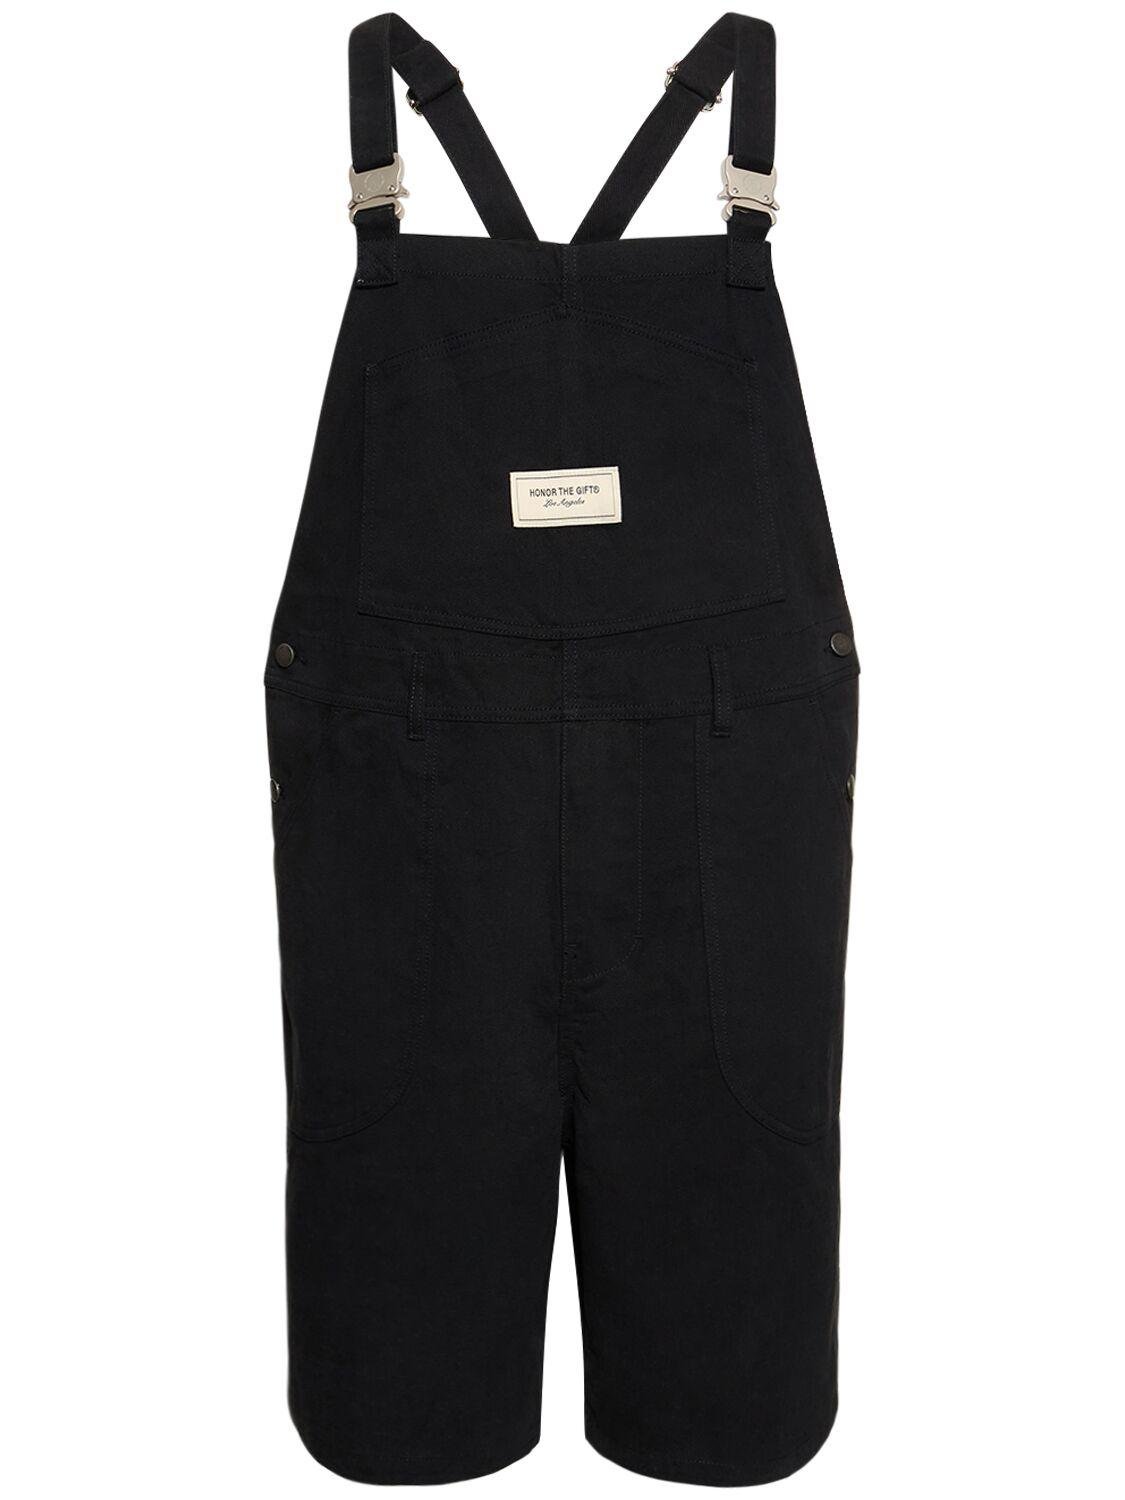 B-summer Short Overalls by HONOR THE GIFT